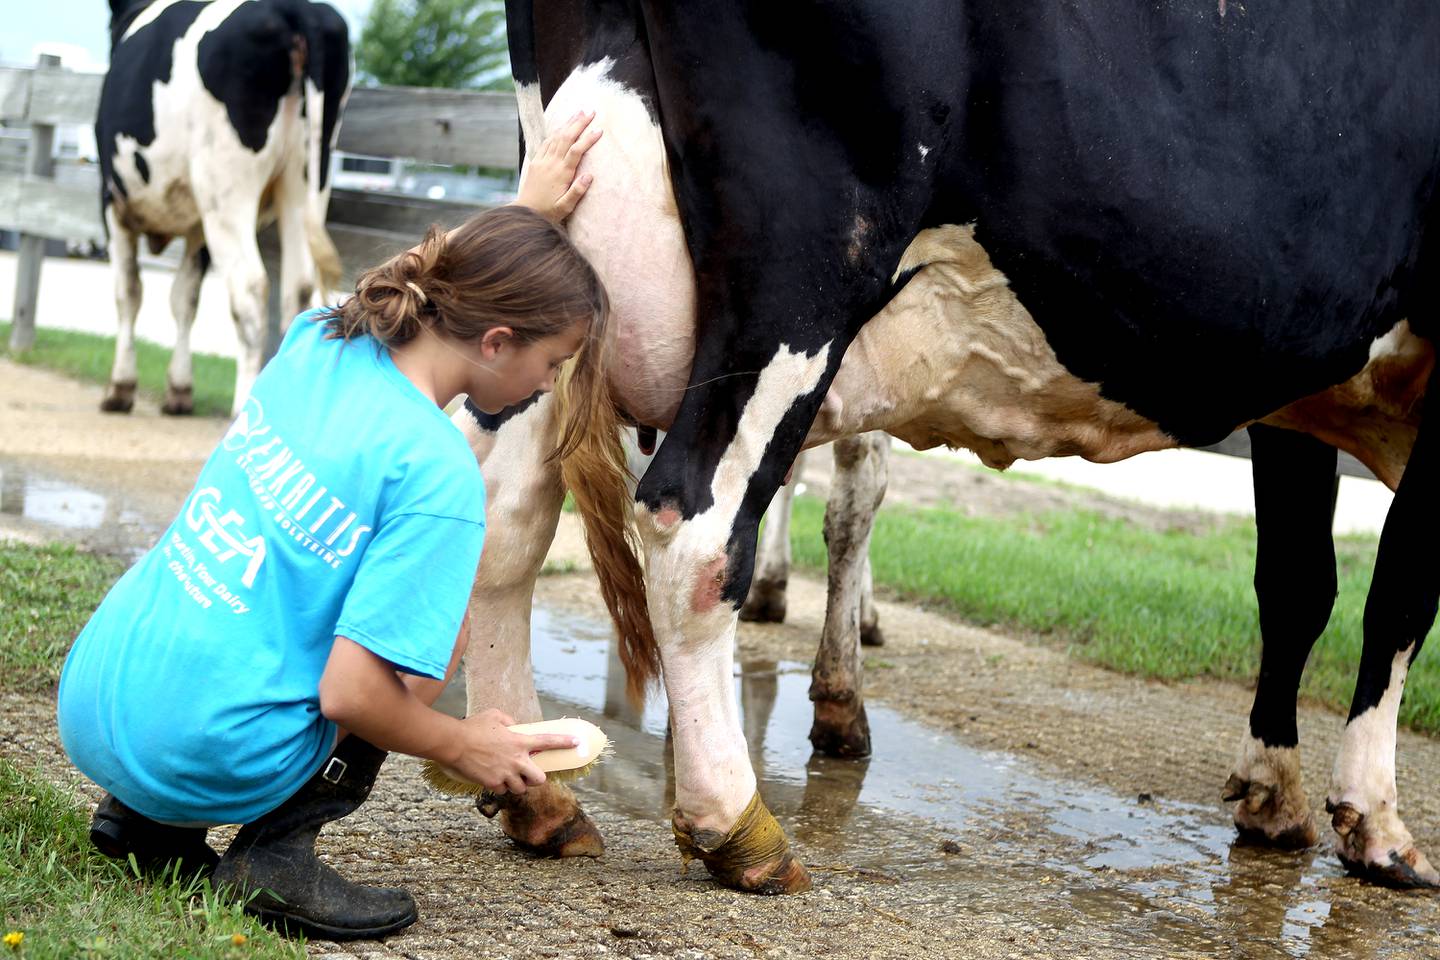 Katelyn Dorn, 13, of St. Charles cleans one of her show holsteins on opening day of the 2021 Kane County Fair in St. Charles on Wednesday, July 14, 2021.